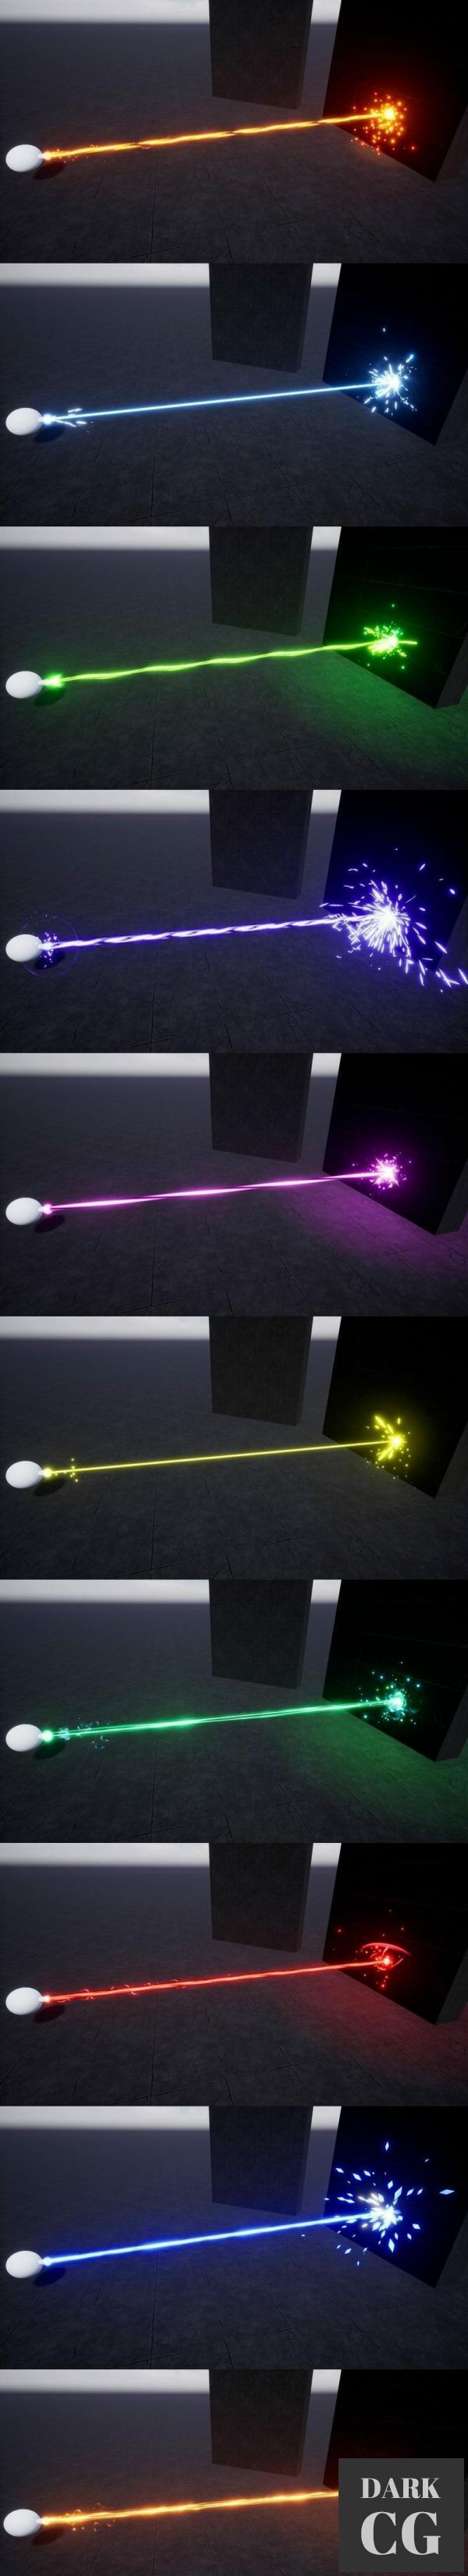 Unreal Engine Marketplace 3D Lasers